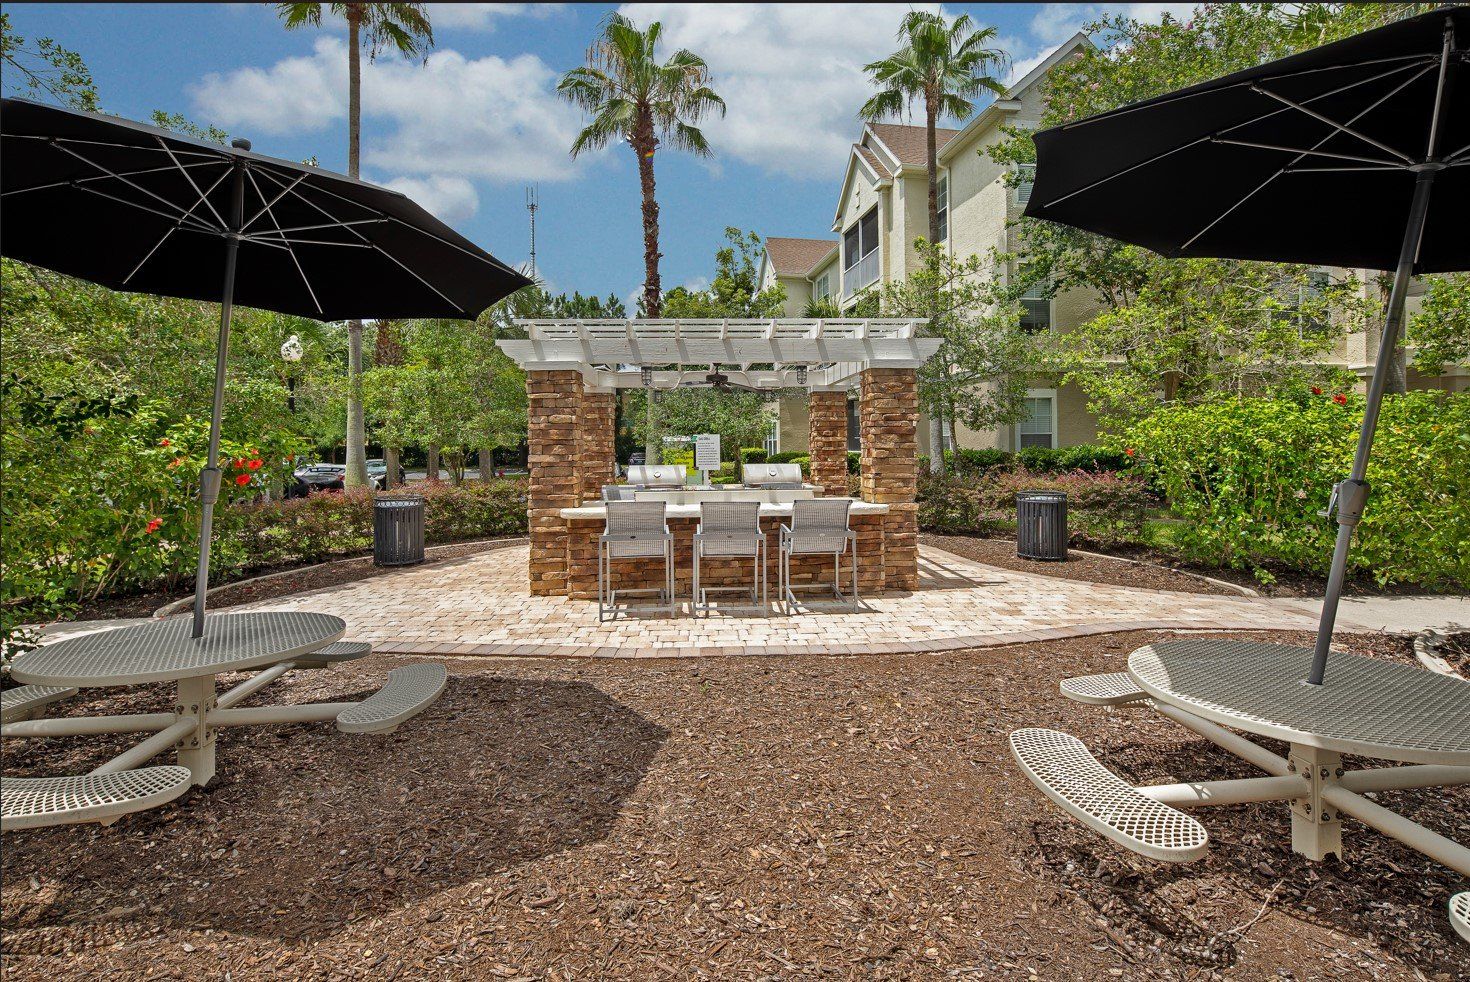 Eddison at Deerwood Park | Apartment Outdoor Lounge with Seating Area and Grill